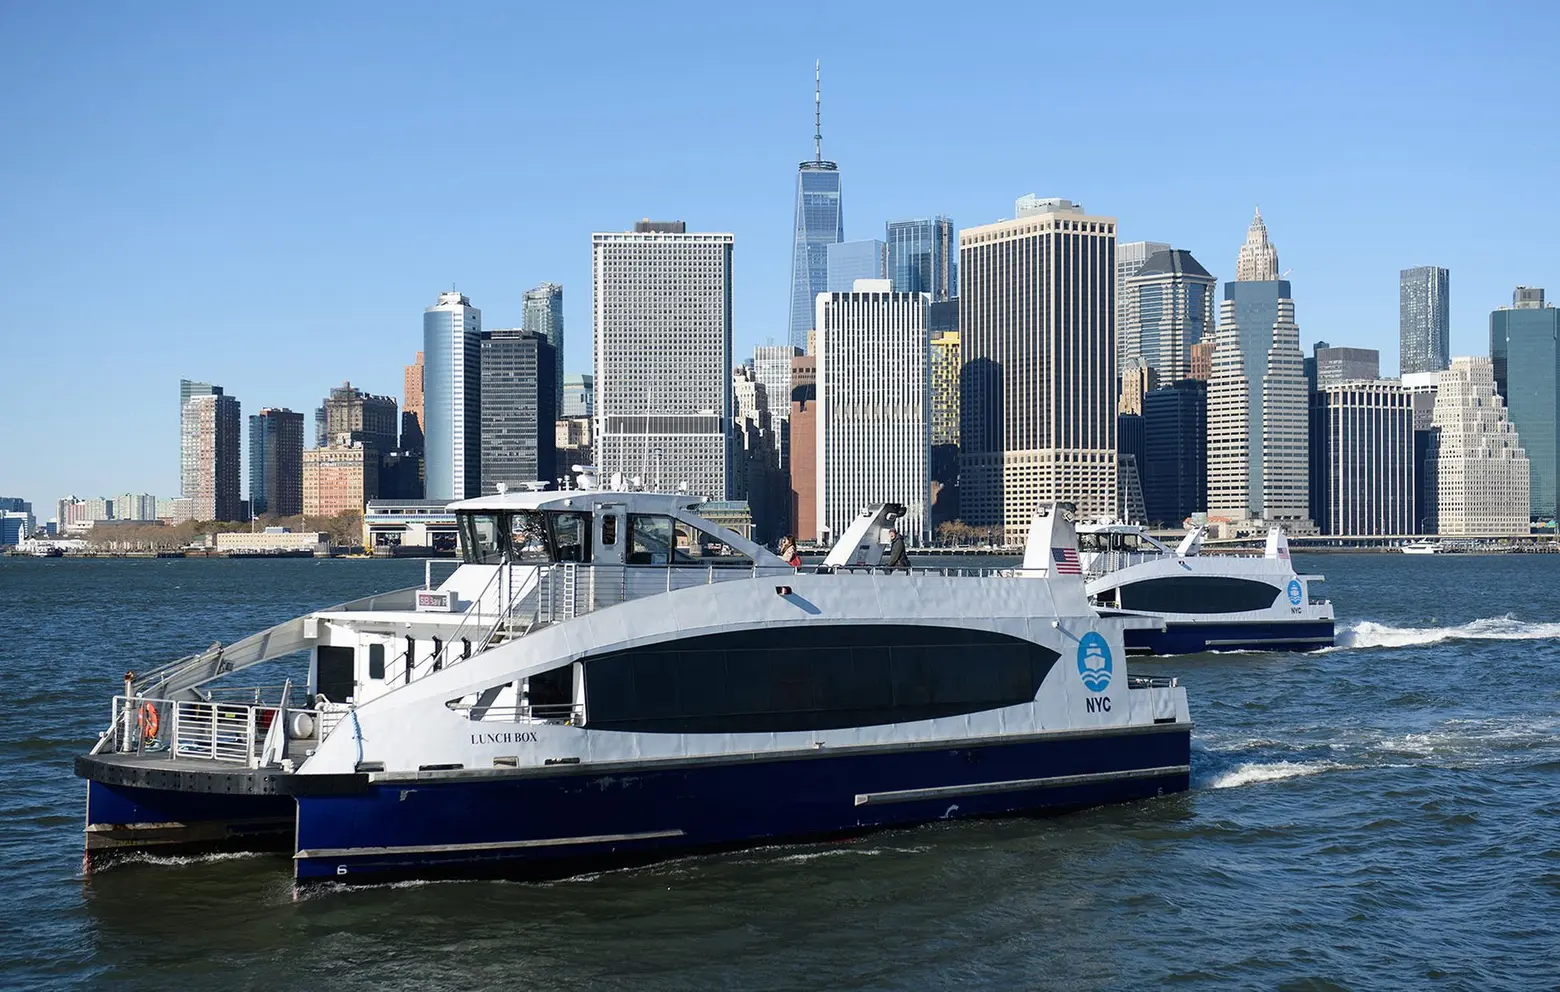 De Blasio will spend an additional $300M on NYC Ferry as ridership doubles